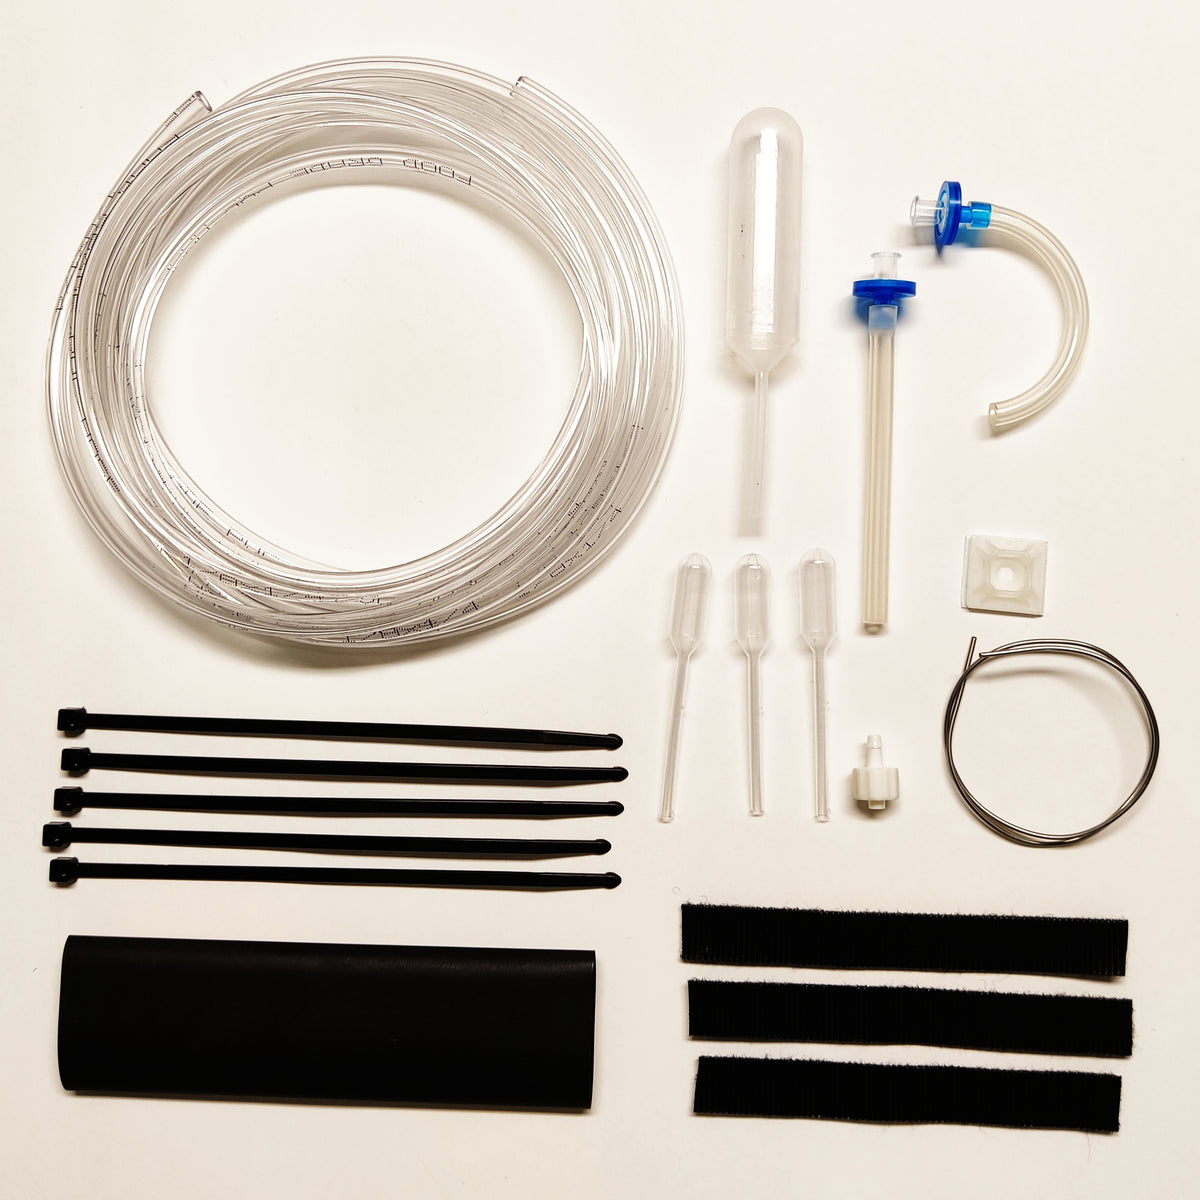 Sip-n-Puff Tubing Kit with Mouthpieces, & Accessories - Vacuum Packed